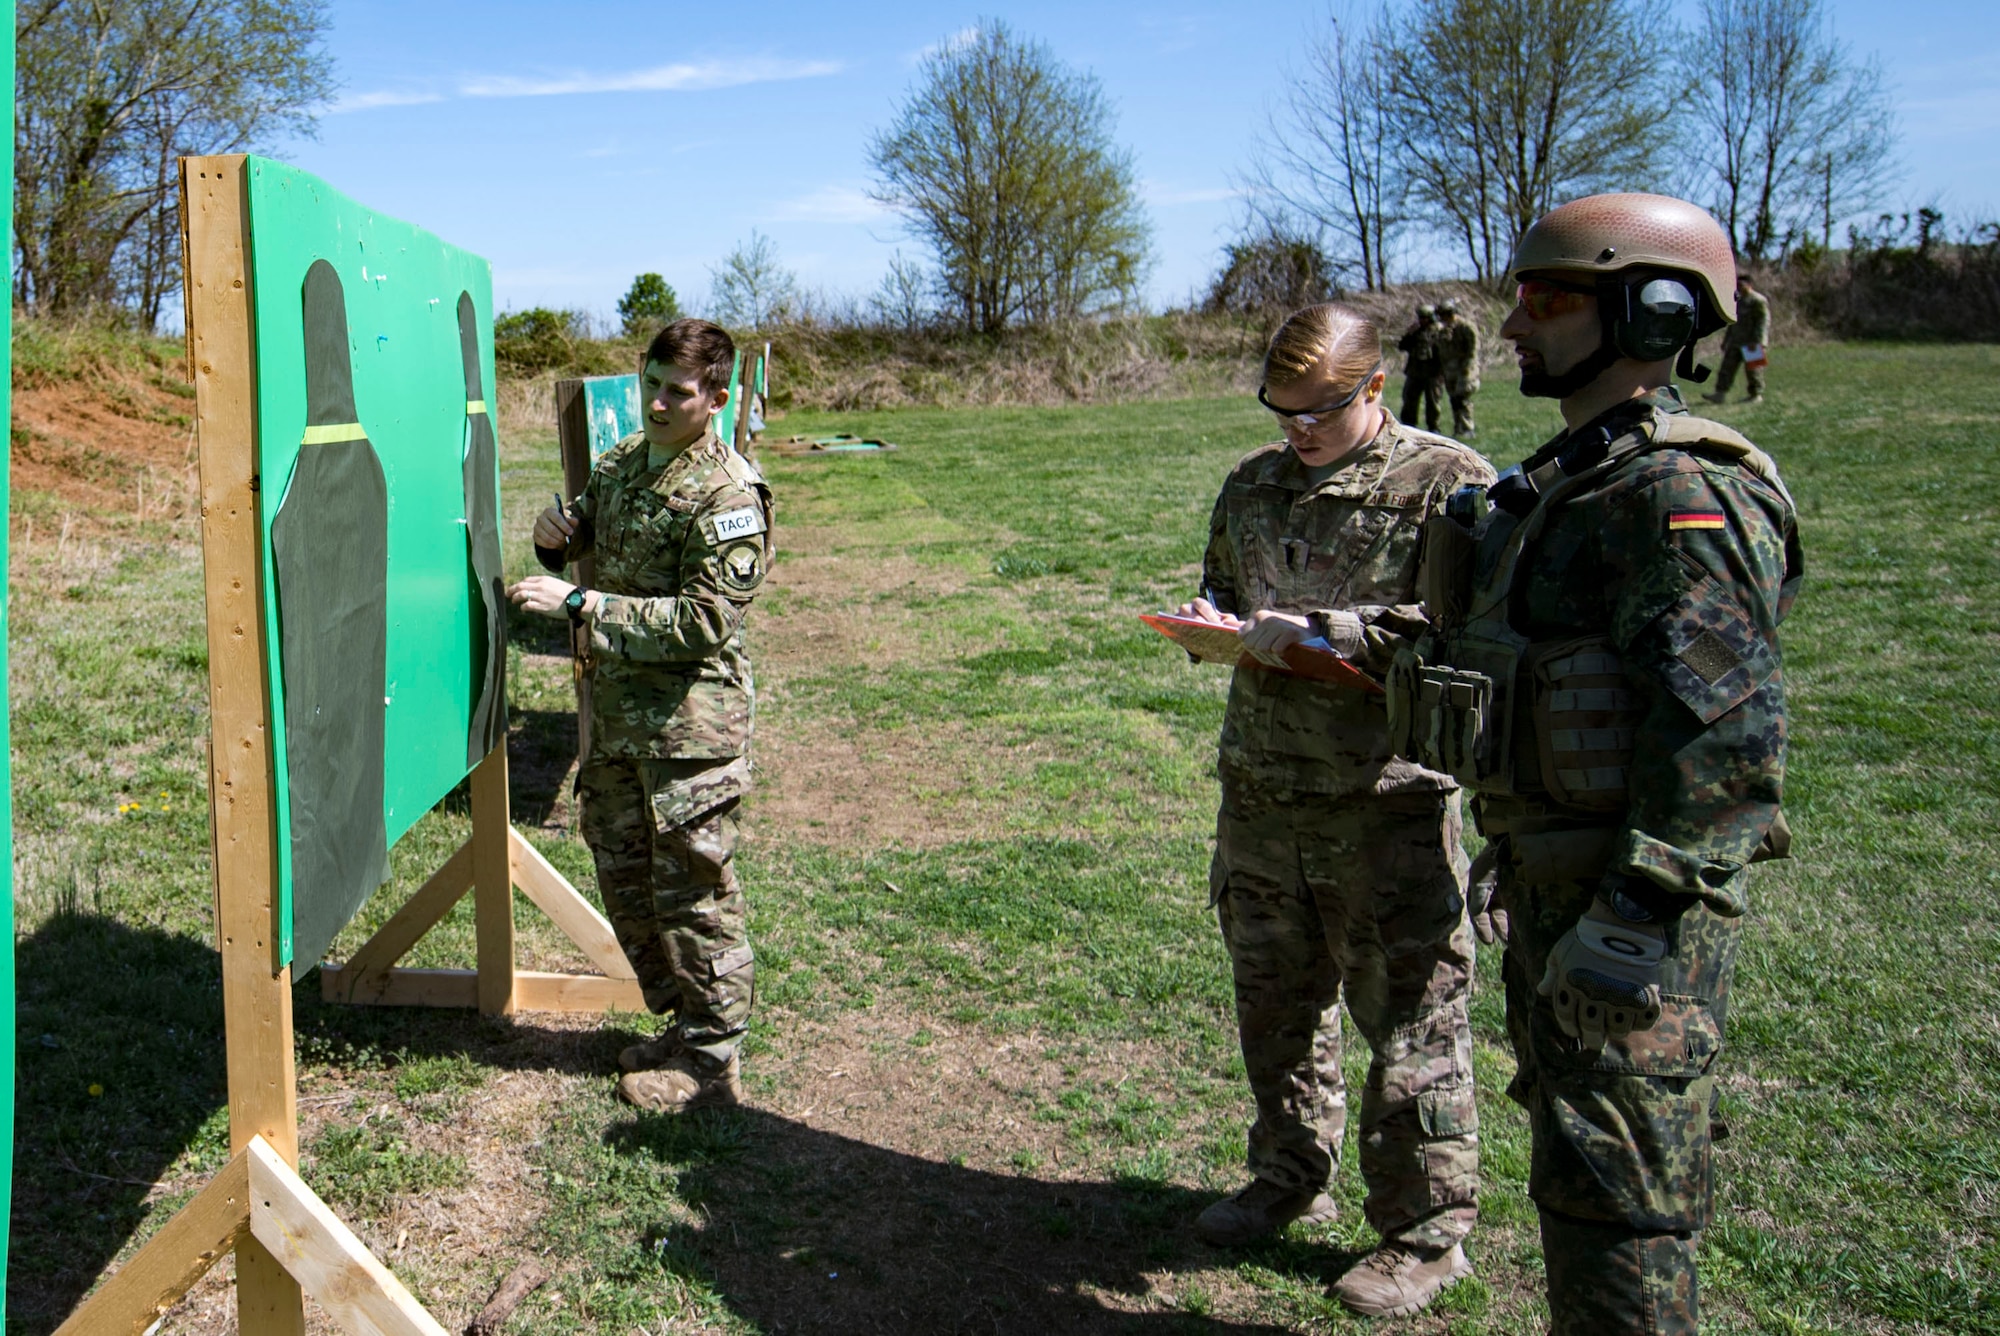 U.S. Air Force Staff Sgt. Christopher Torrez, left, 19th Air Support Operations Squadron Tactical Air Control Party specialist, counts the number of shots on target while 1st Lt. Megan Cox, 19th ASOS air liaison officer, and German Air Force Maj. Nader Samadi, German Air Ground Operations Squadron commander observe during the shooting portion of the a German armed forces proficiency assessment, April 4, 2017, at Fort Campbell, Ky. While at Fort Campbell, The German Air Force members hosted a German armed forces proficiency assessment for Airmen consisting of shooting firearms, swimming, agility exercises and a rucksack march.